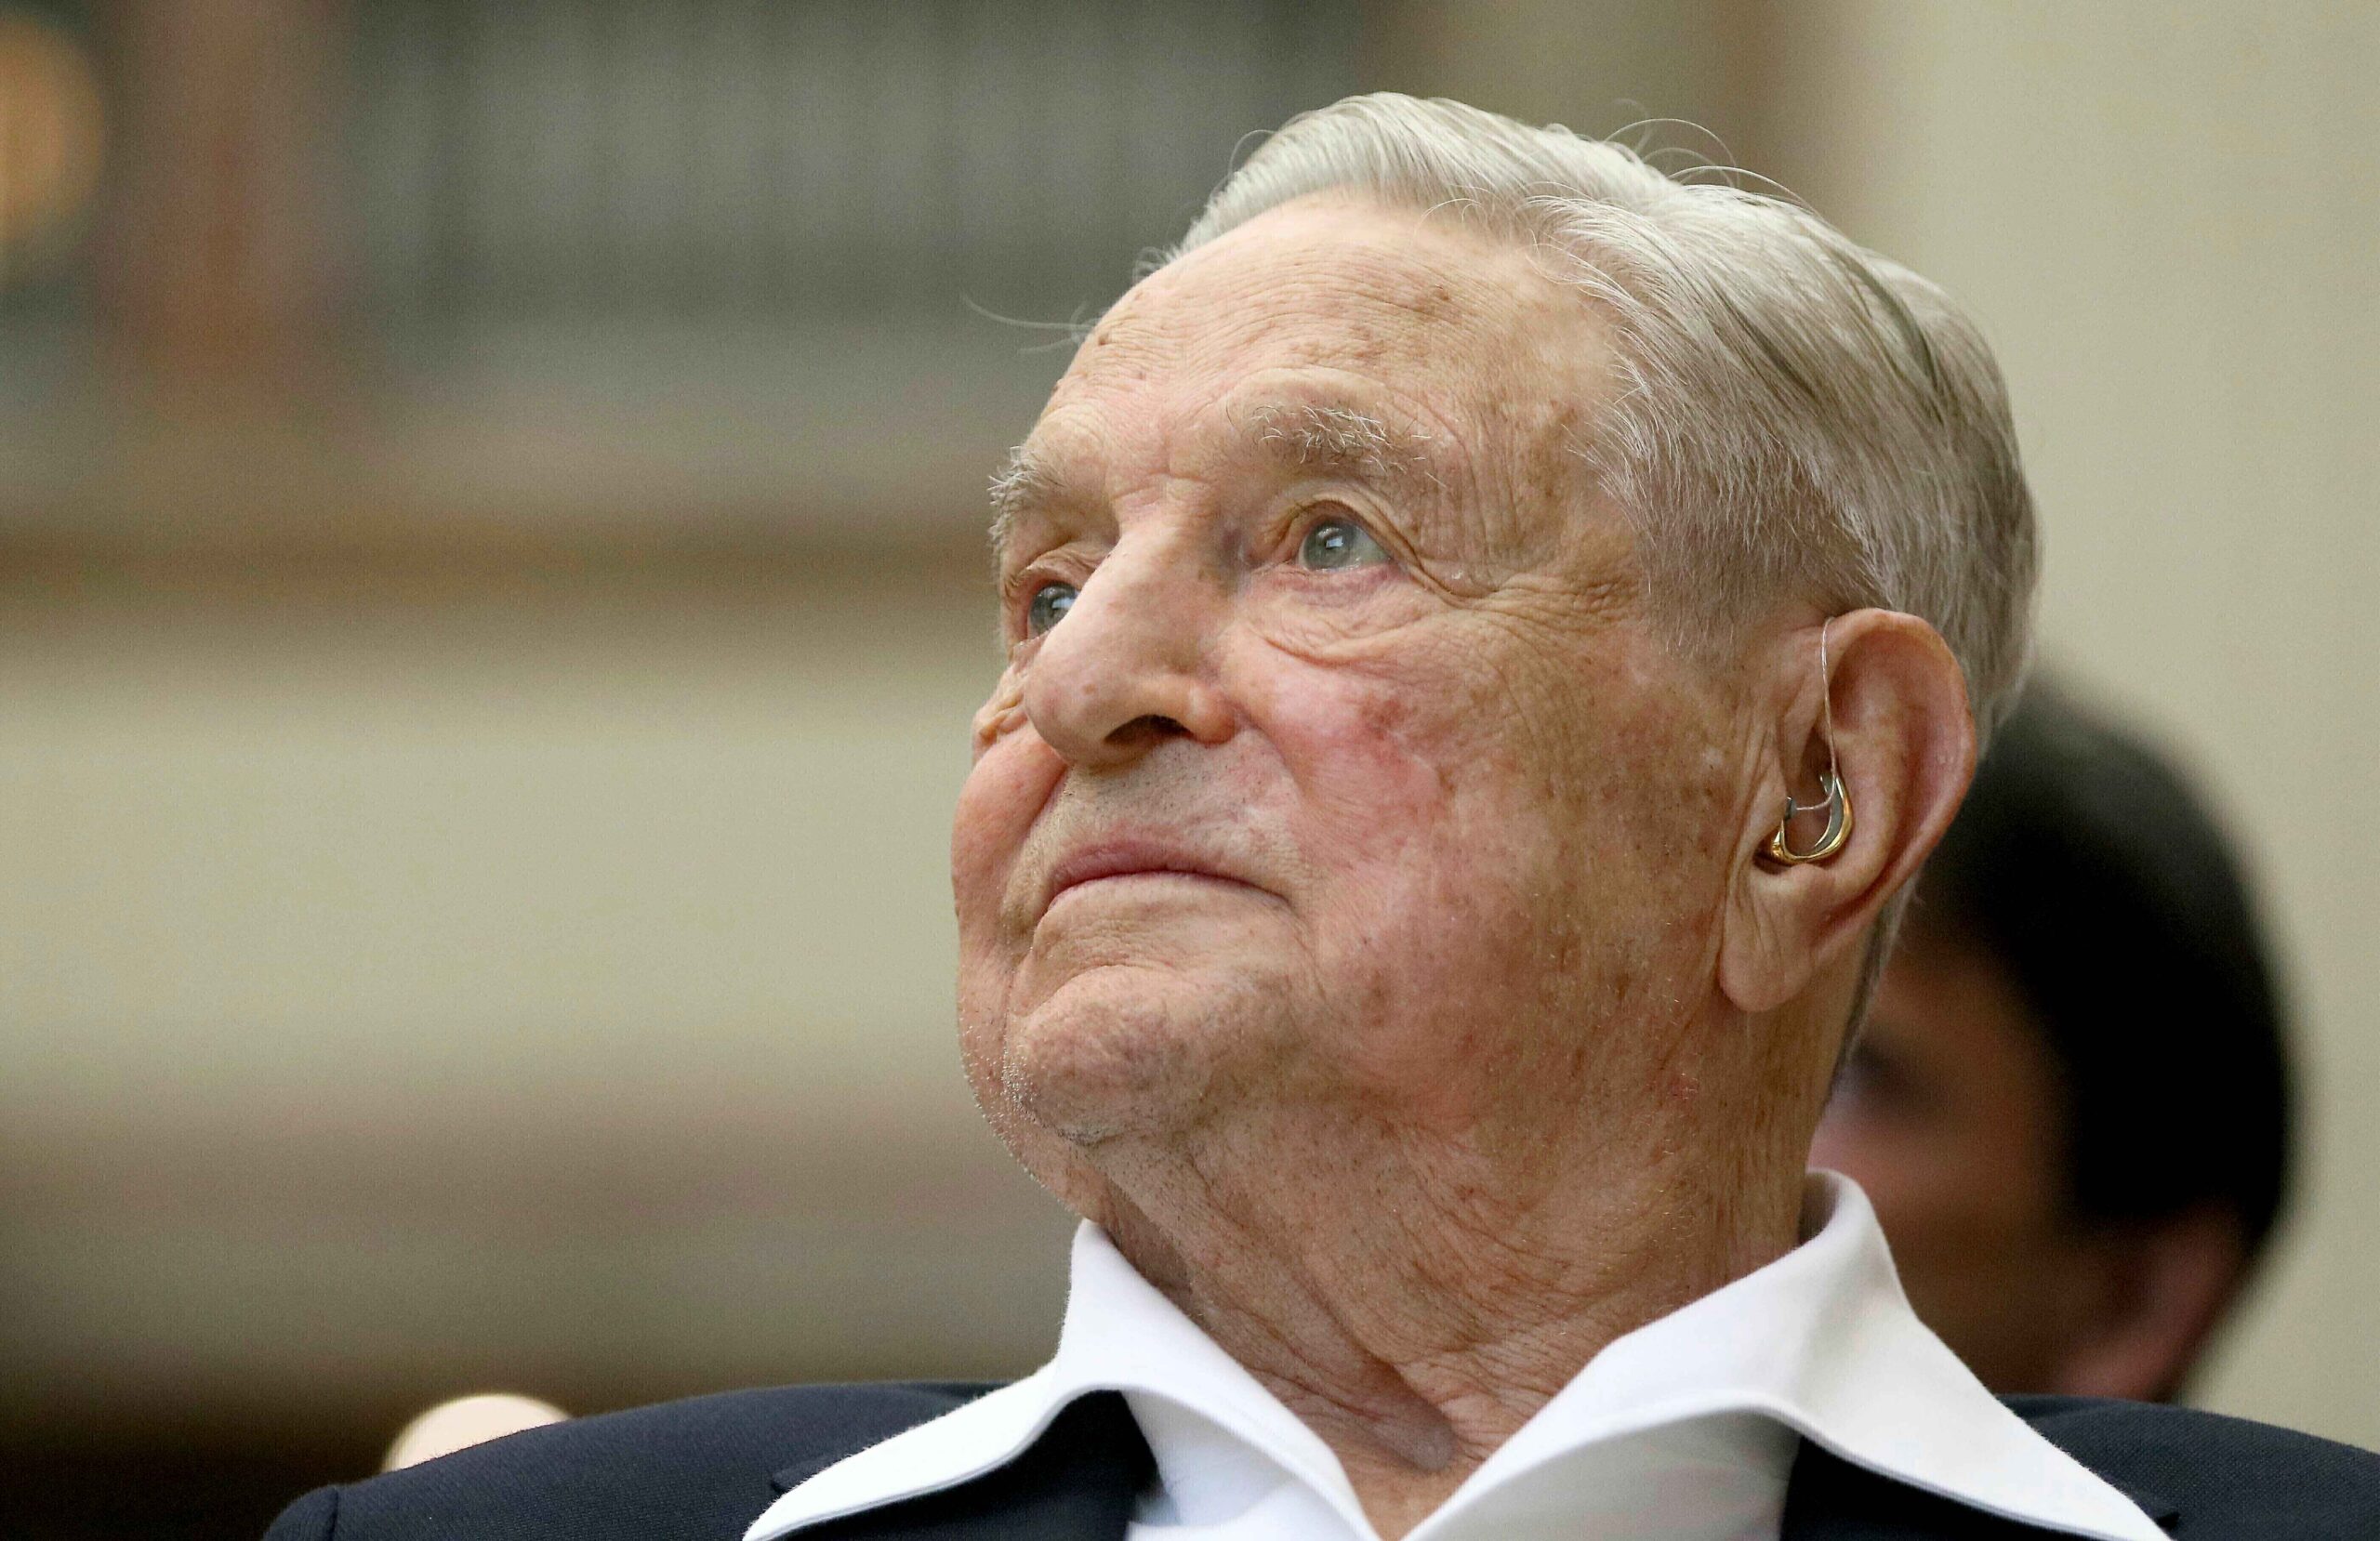 The Open Society Foundation, founded by globalist George Soros and now controlled by his son Alexander Soros, is moving its focus away from the European Union.